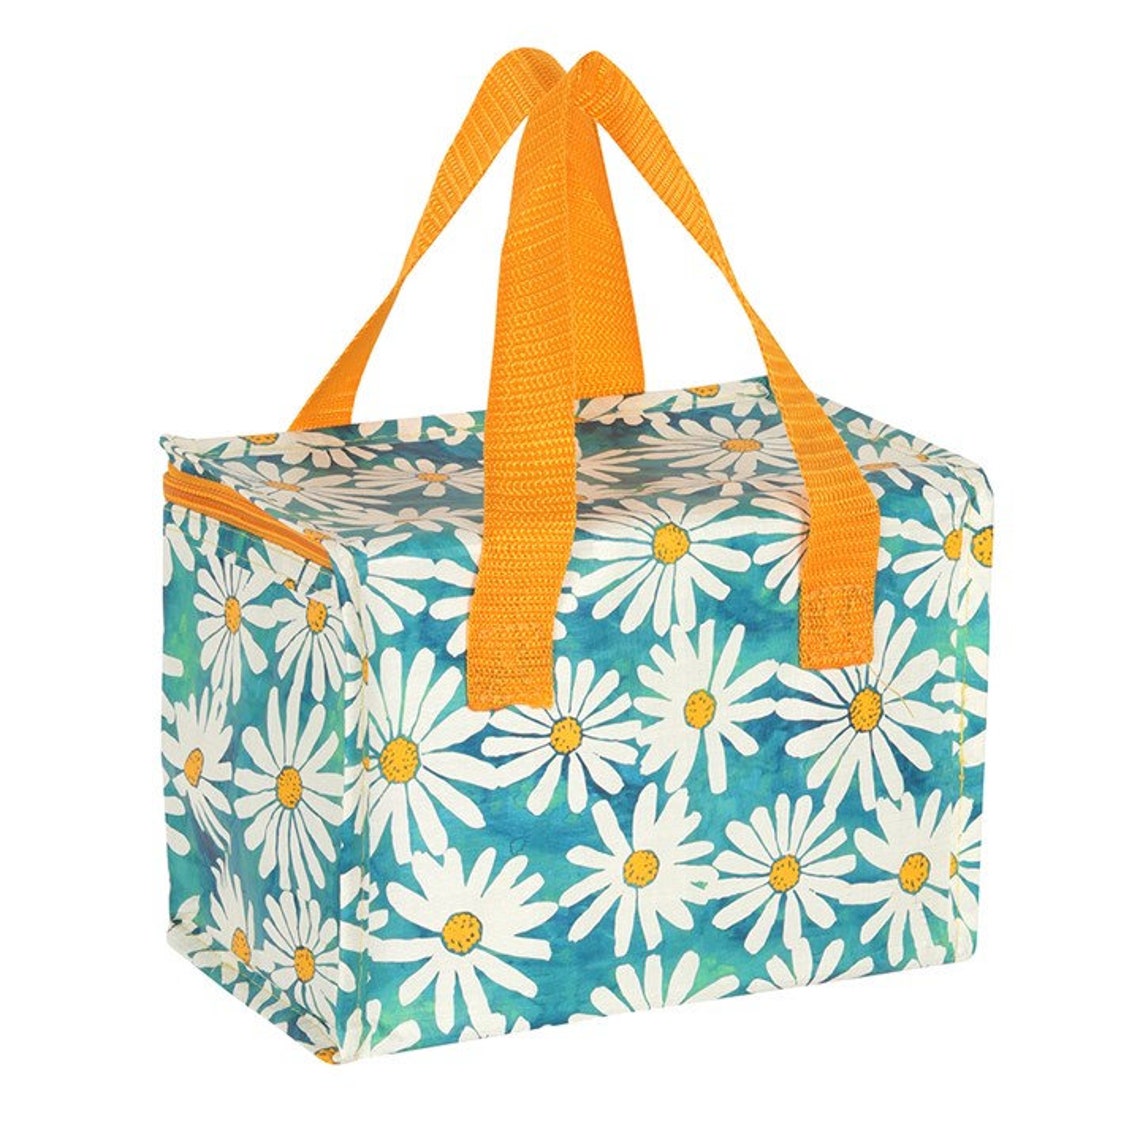 Daisy Lunch Bag Cooler Box Summer Spring Turquoise Insulated | Etsy